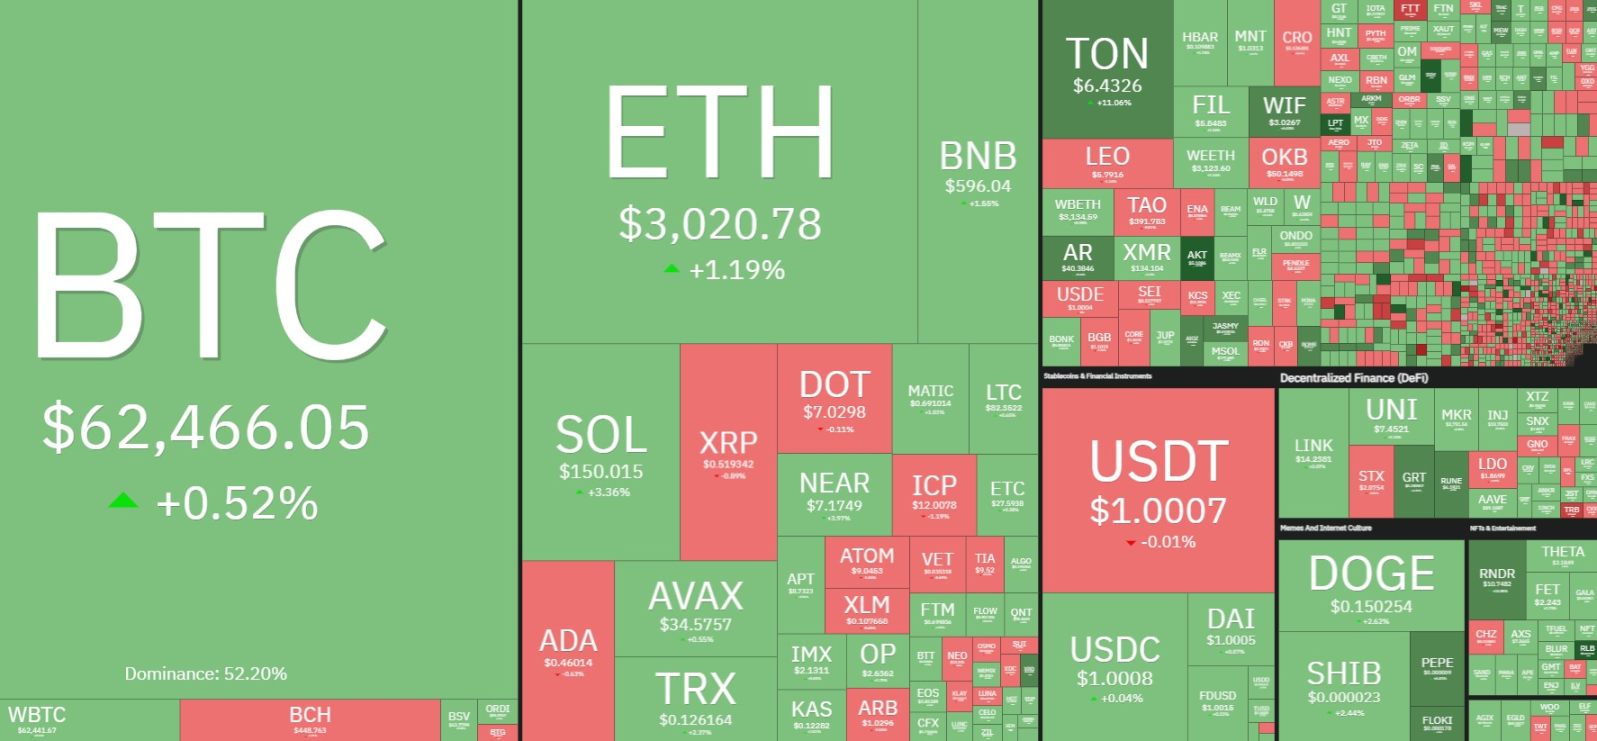 BTC is unable to consolidate, Trumps words trigger MAGA coin explosion